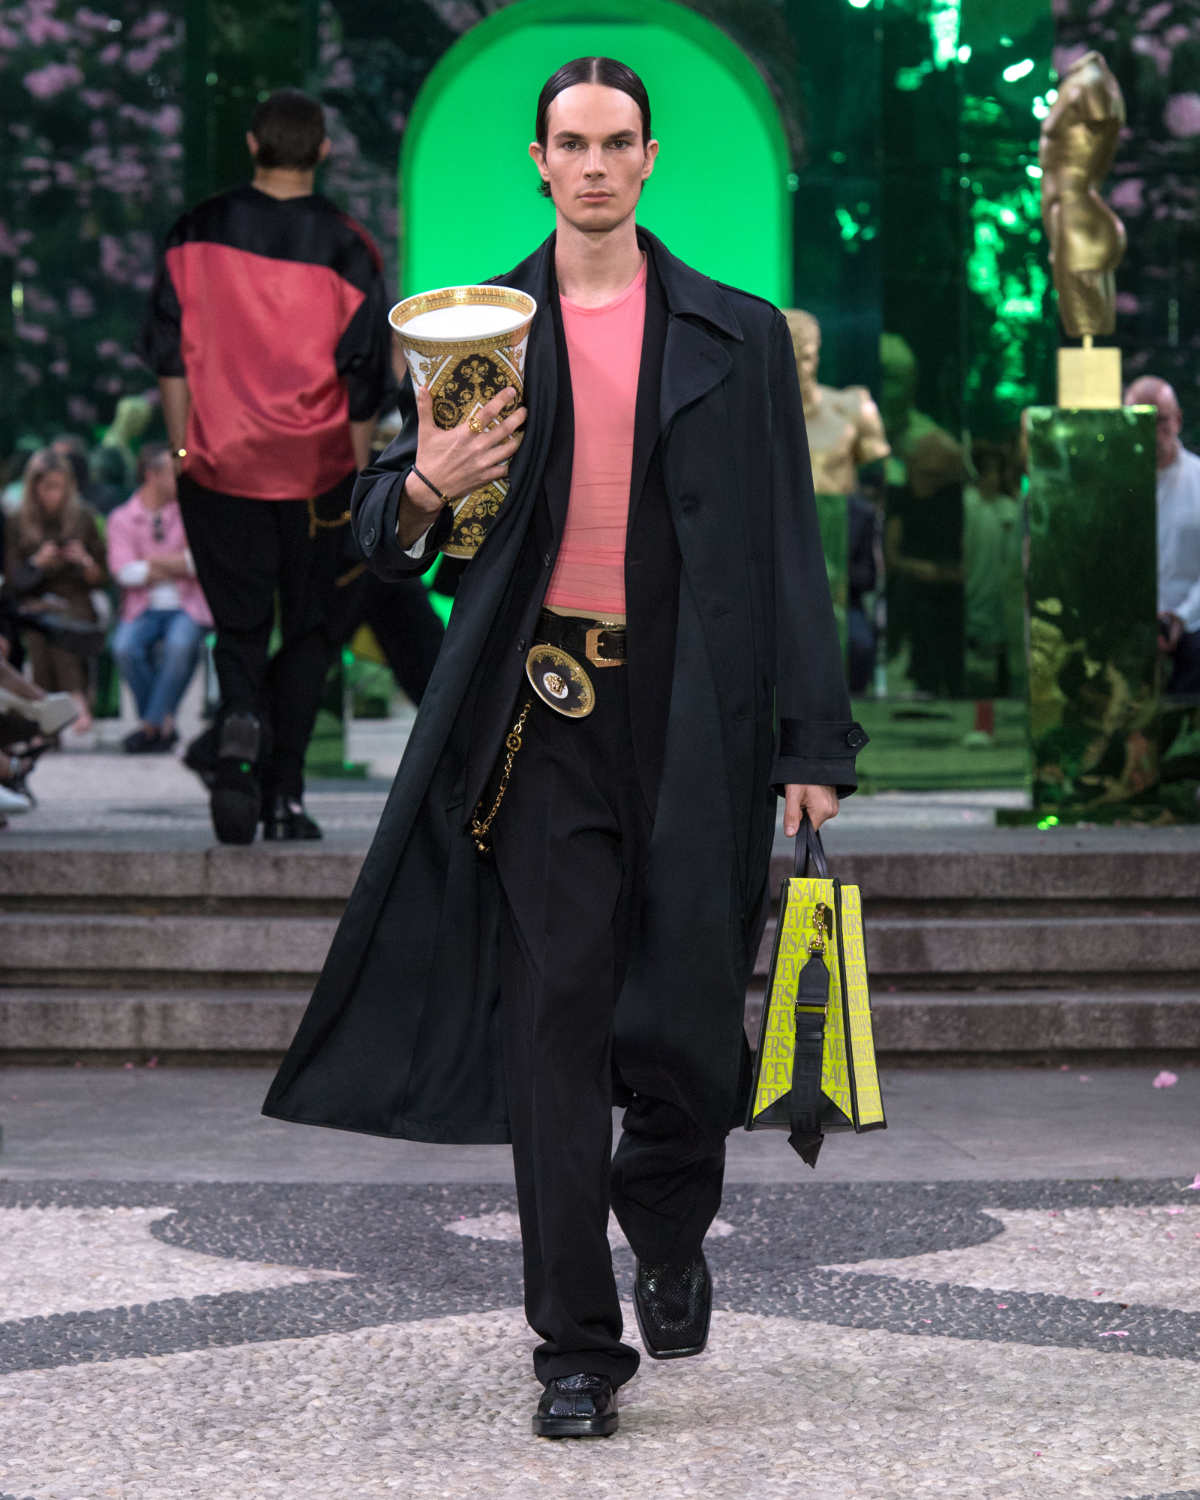 Versace Presents Its New Spring-Summer 2023 Men’s Collection